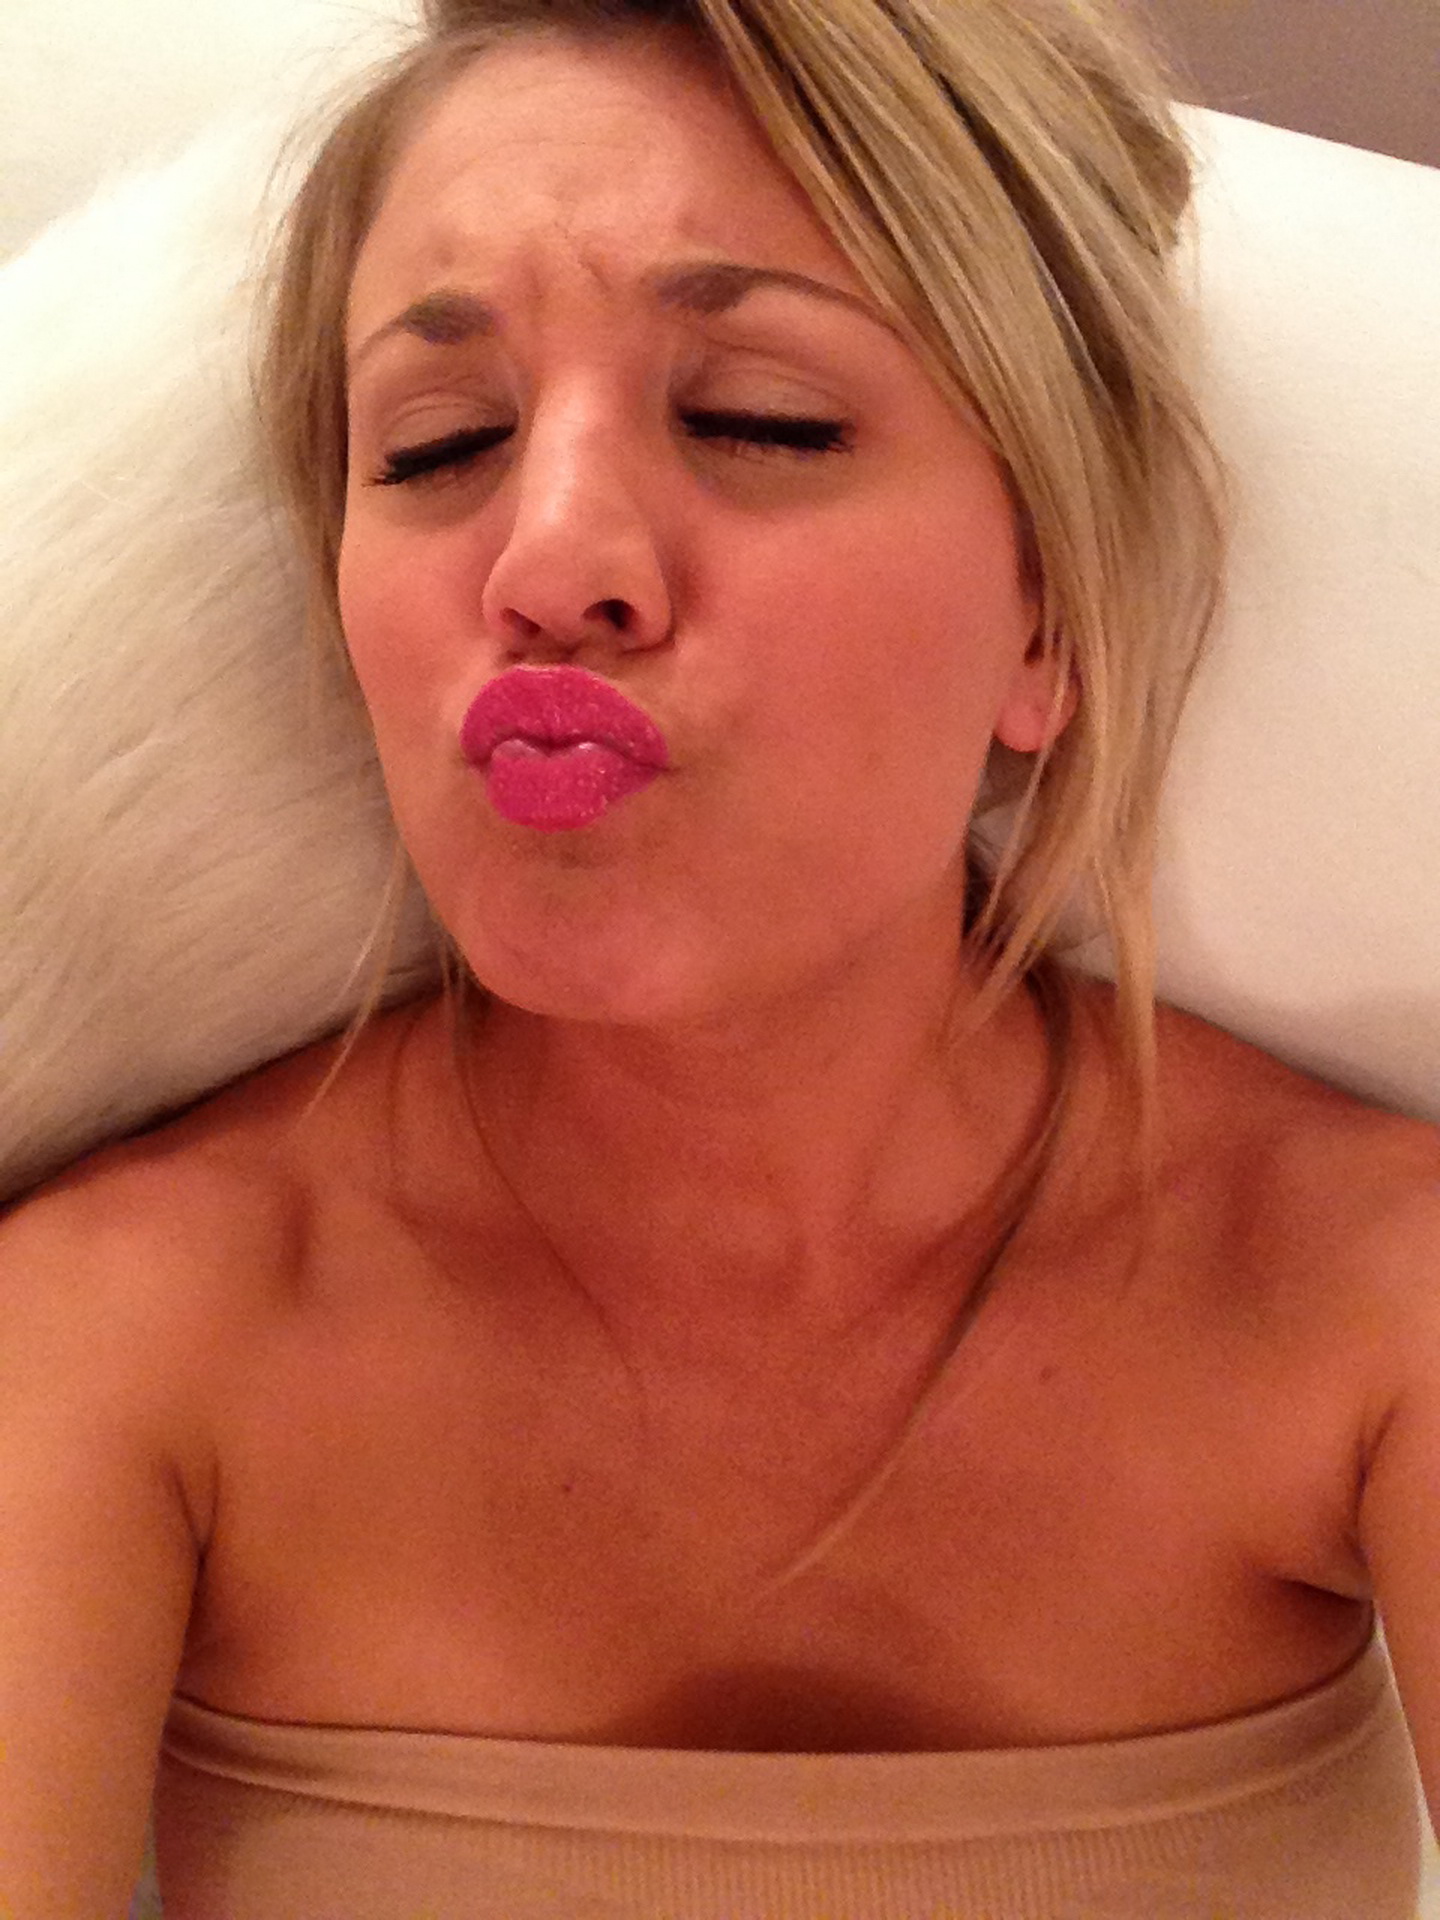 Kaley_Cuoco_leaked_private_nude_photo_and_video_hacked_personal_naked_pics_46x_MixQ_21.JPG